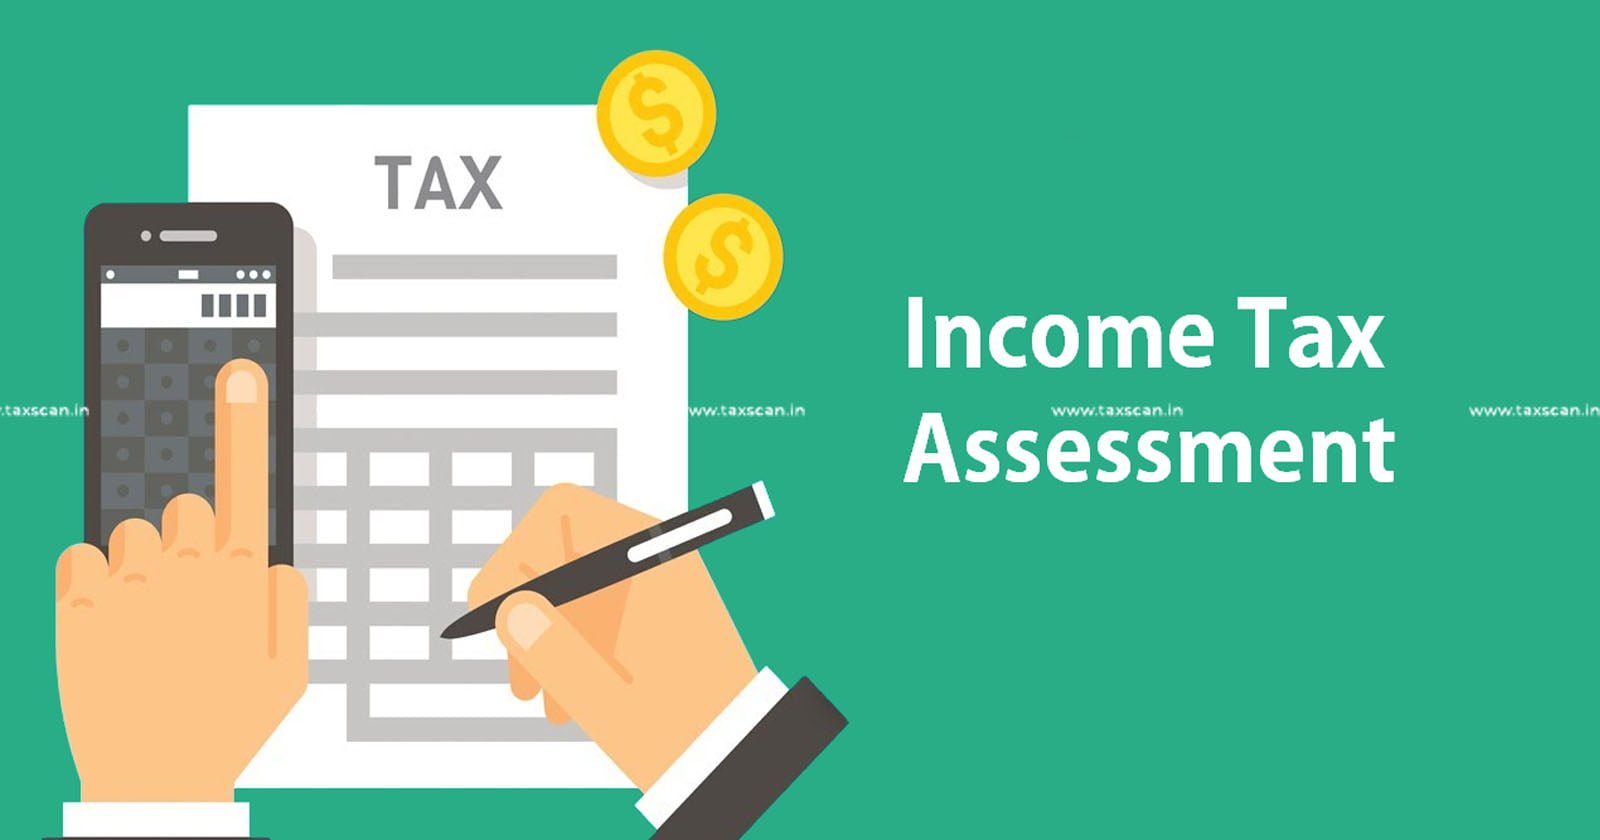 Madras High Court - Income Tax - Assessment Order - Income Tax Assessment - taxscan